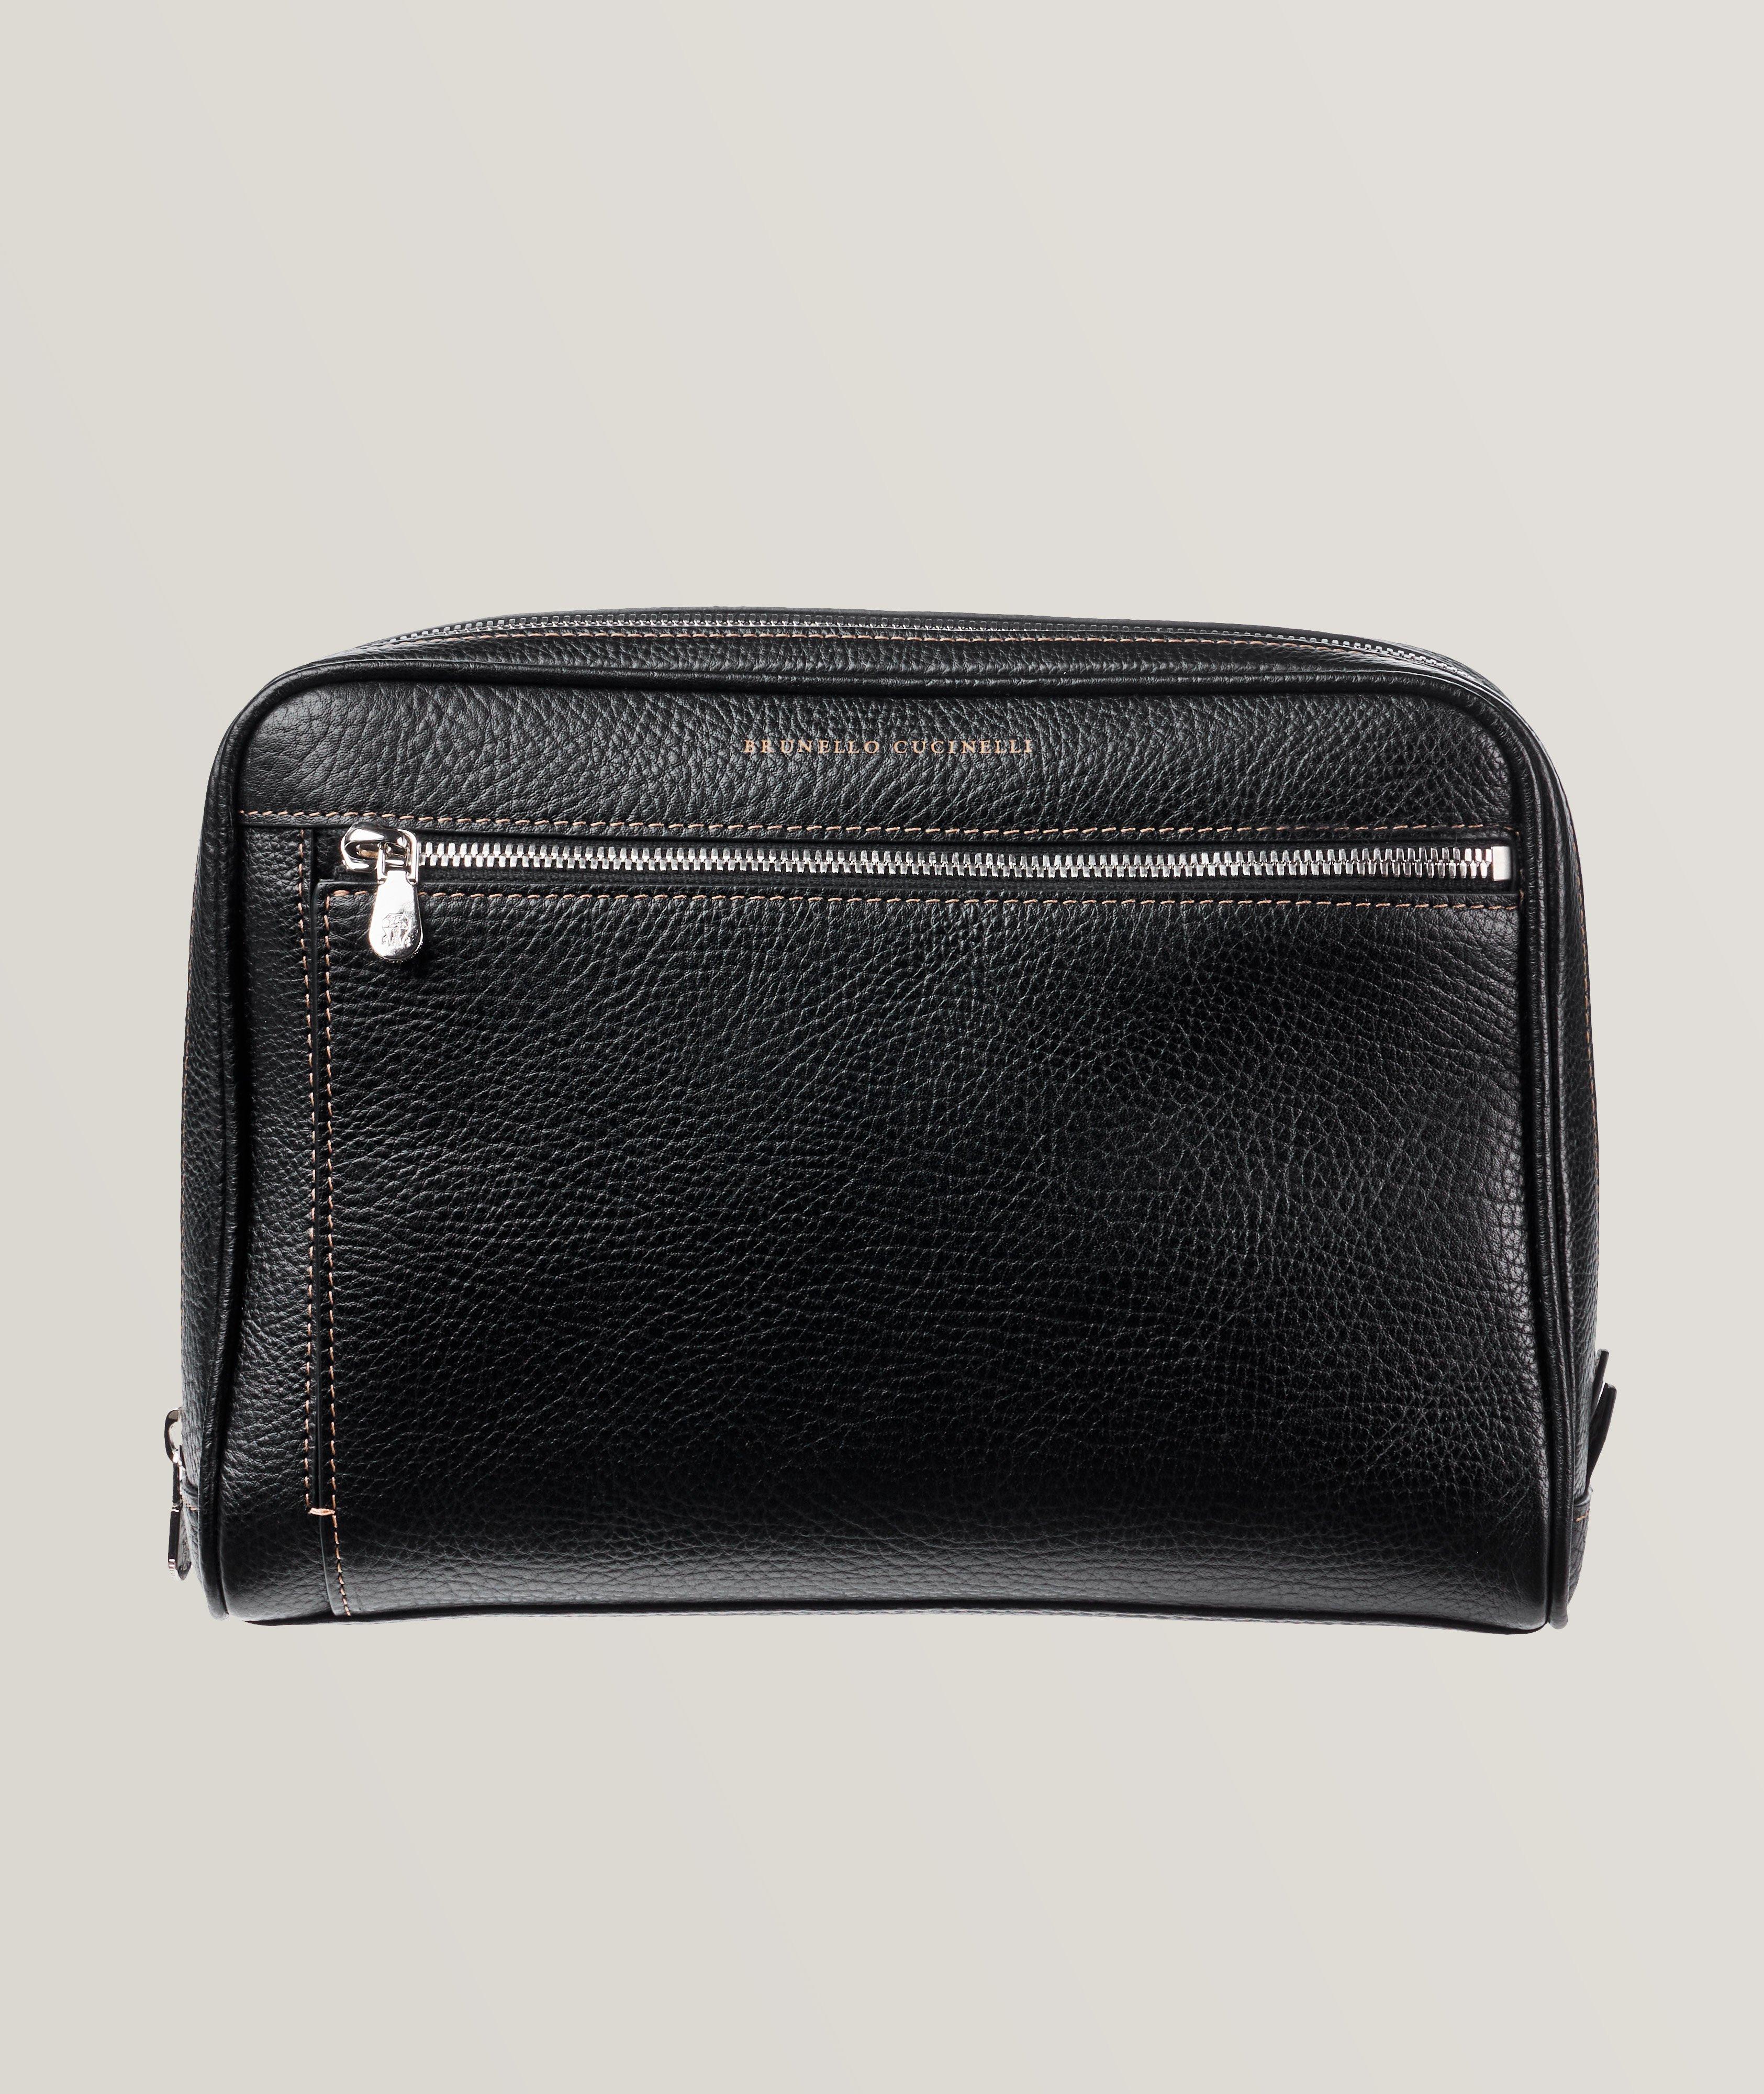 Grained Calfskin Toiletry Bag image 0